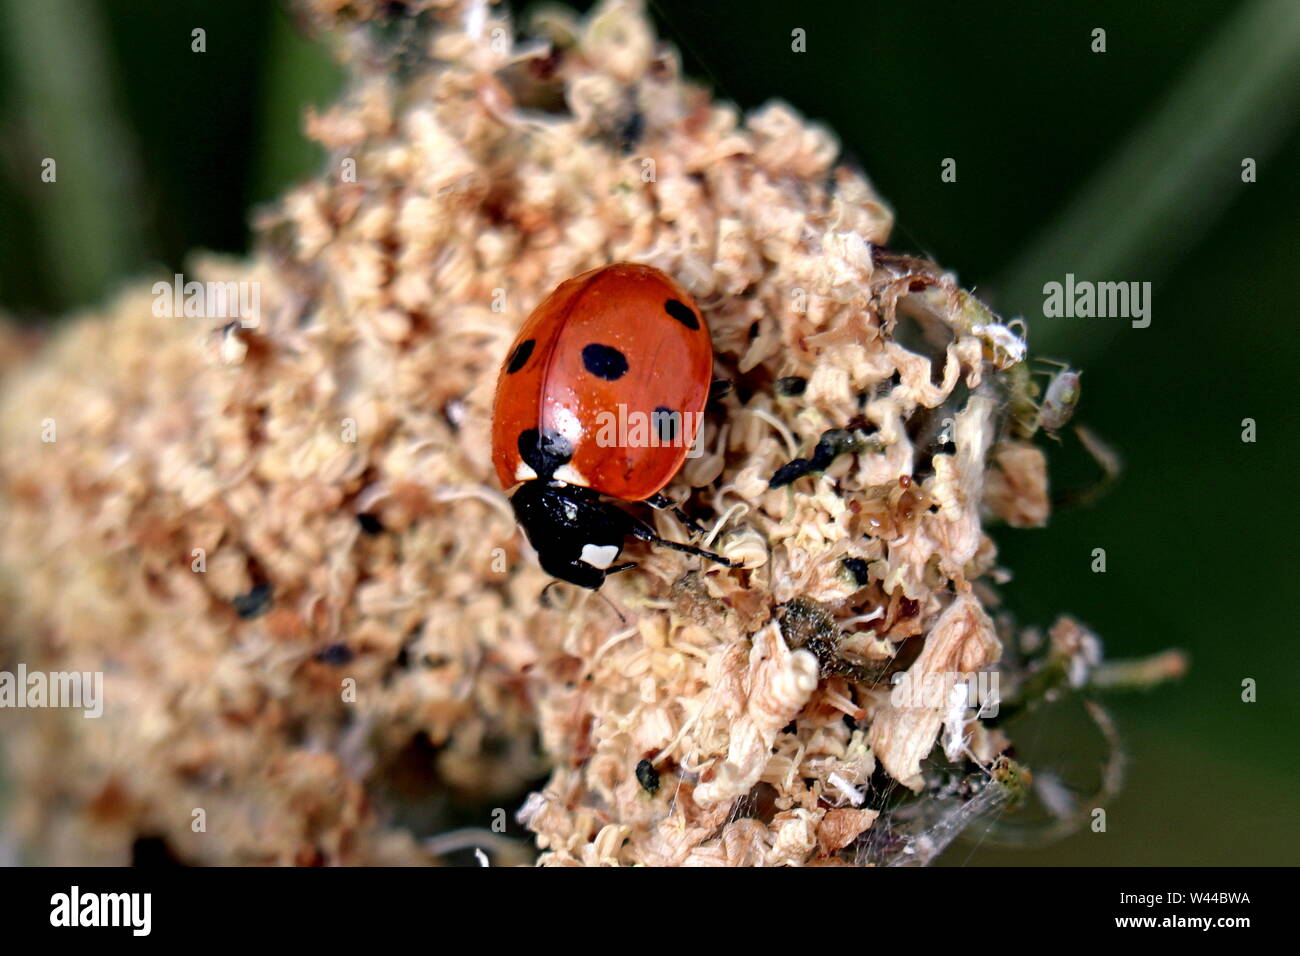 Ladybird, 7-Spot Ladybug. Coccinellid, derived from Latin word coccineus – scarlet. Ladybird originated in Britain, Our Lady's bird or Lady beetle Stock Photo